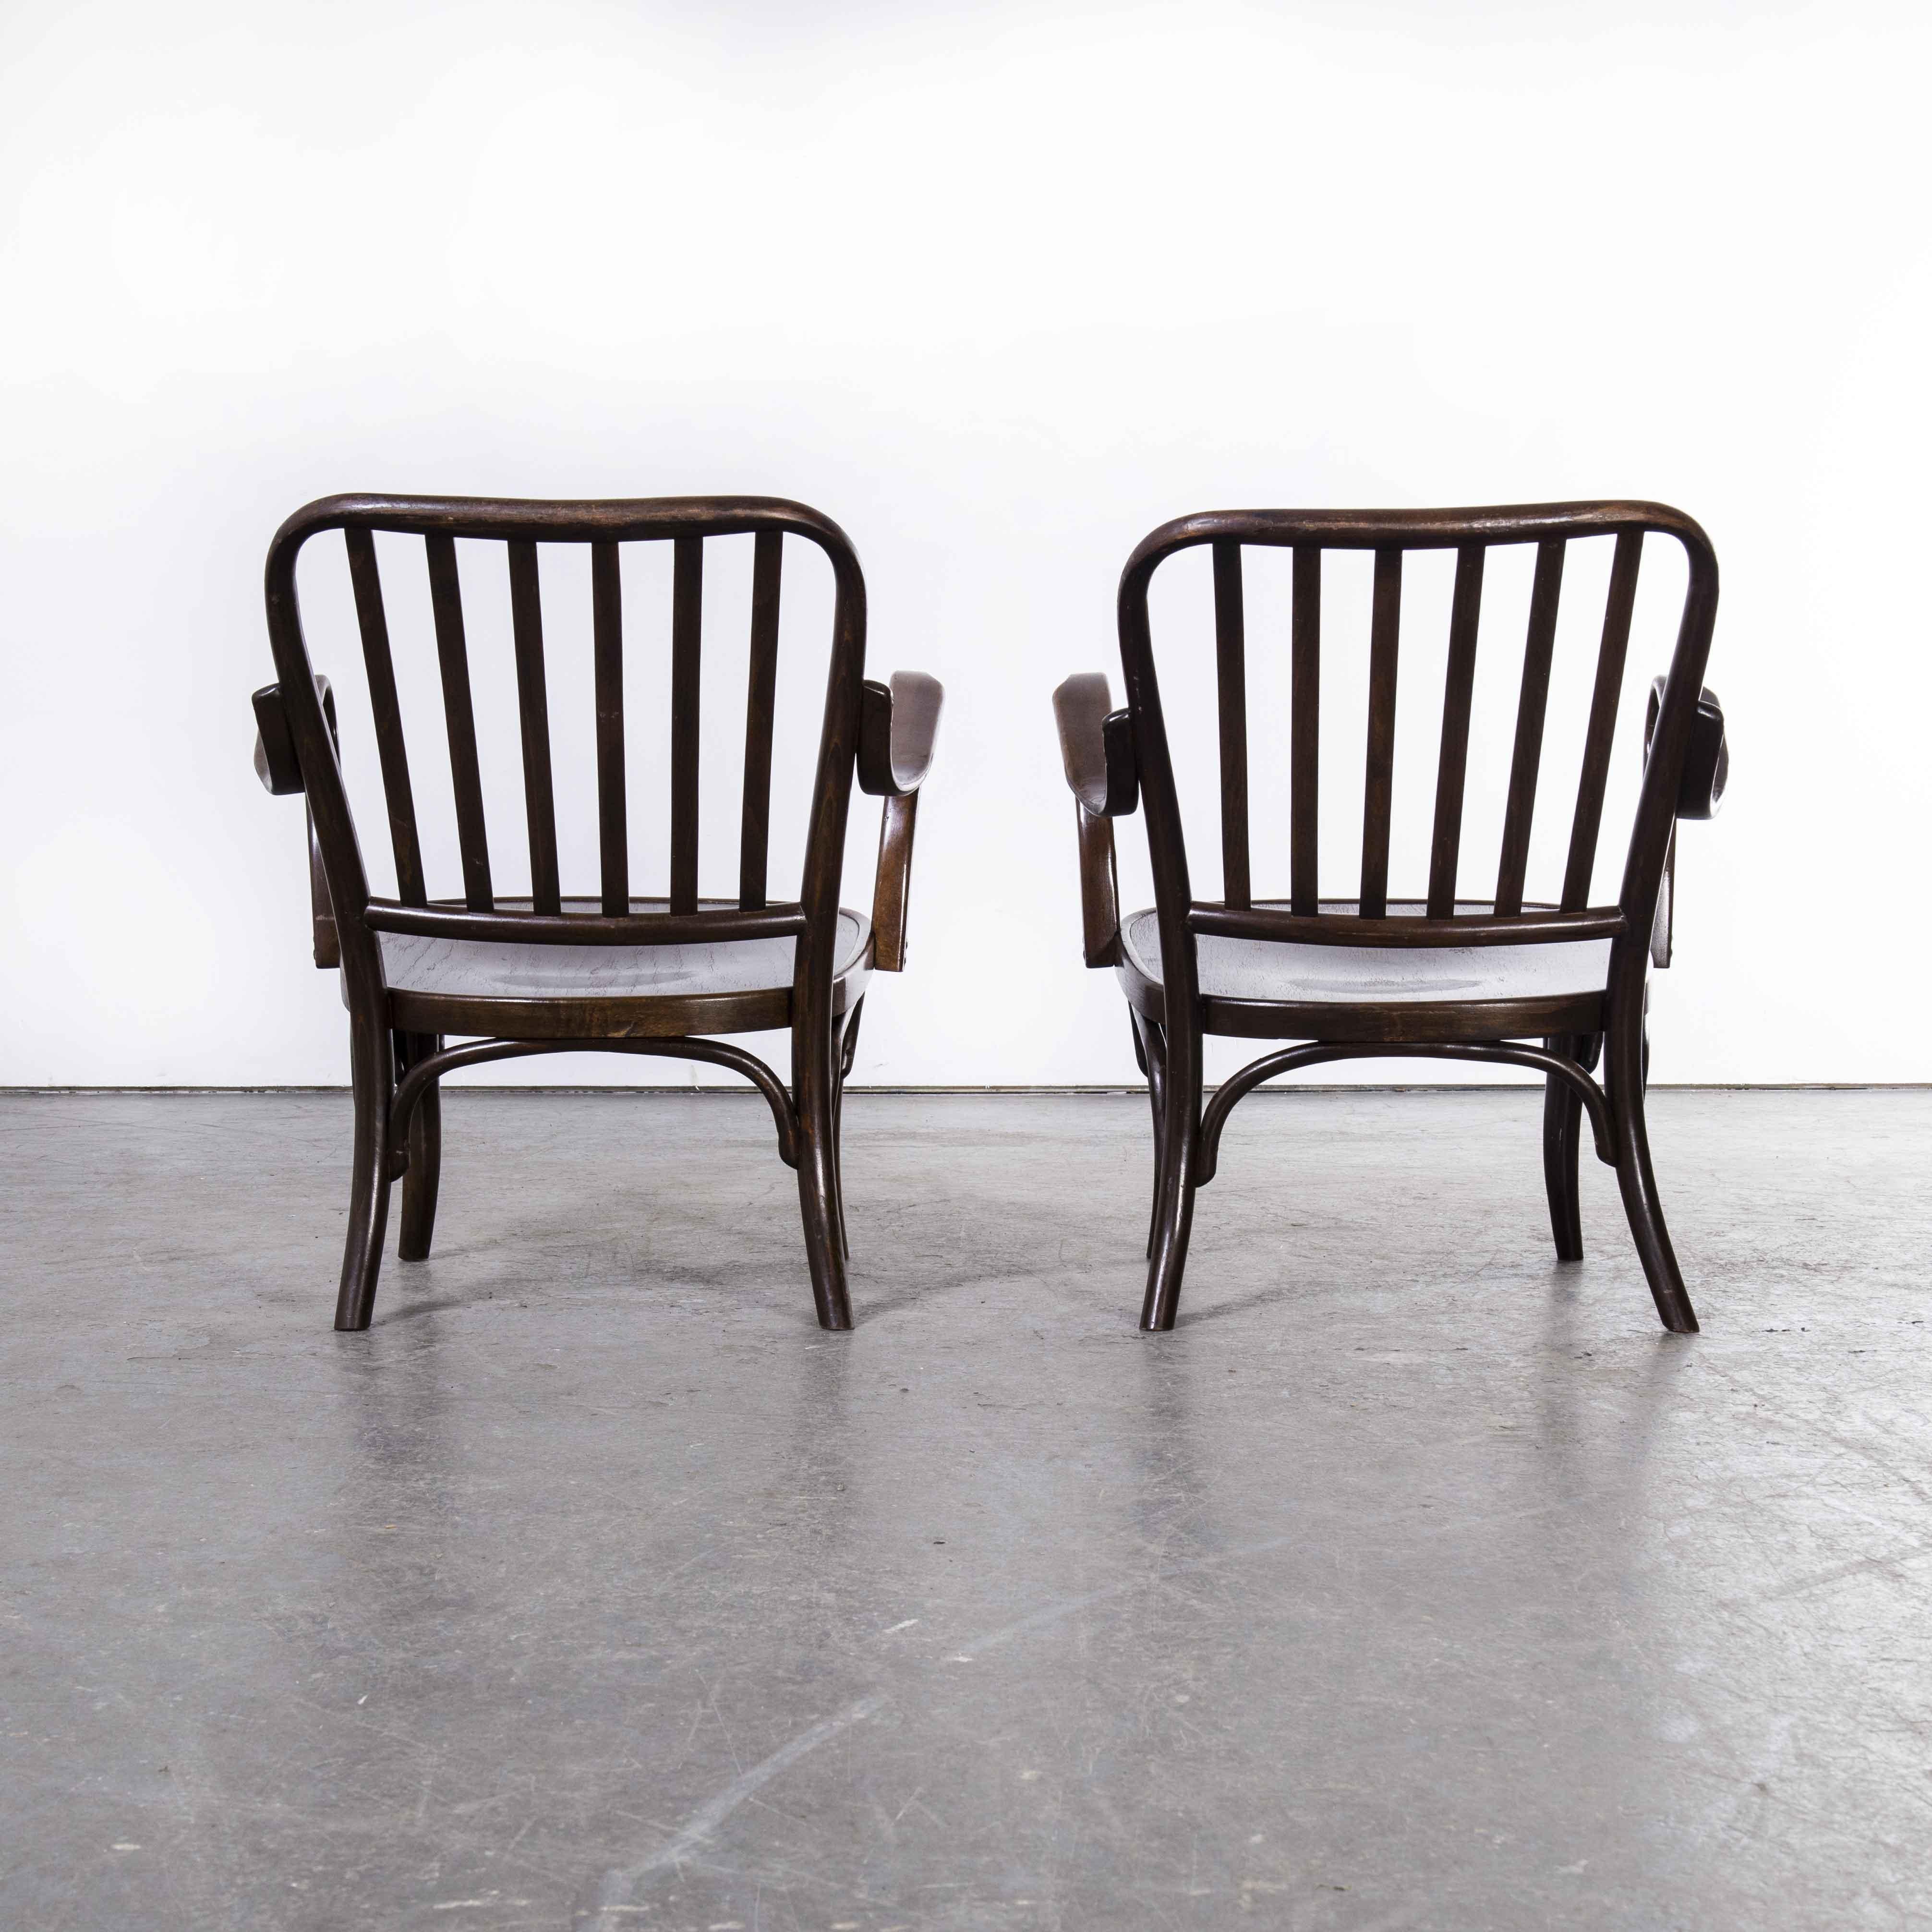 Mid-20th Century 1930's Bentwood Thonet A752 Low Arm Chairs Model A752 by Joseph Frank, Pair